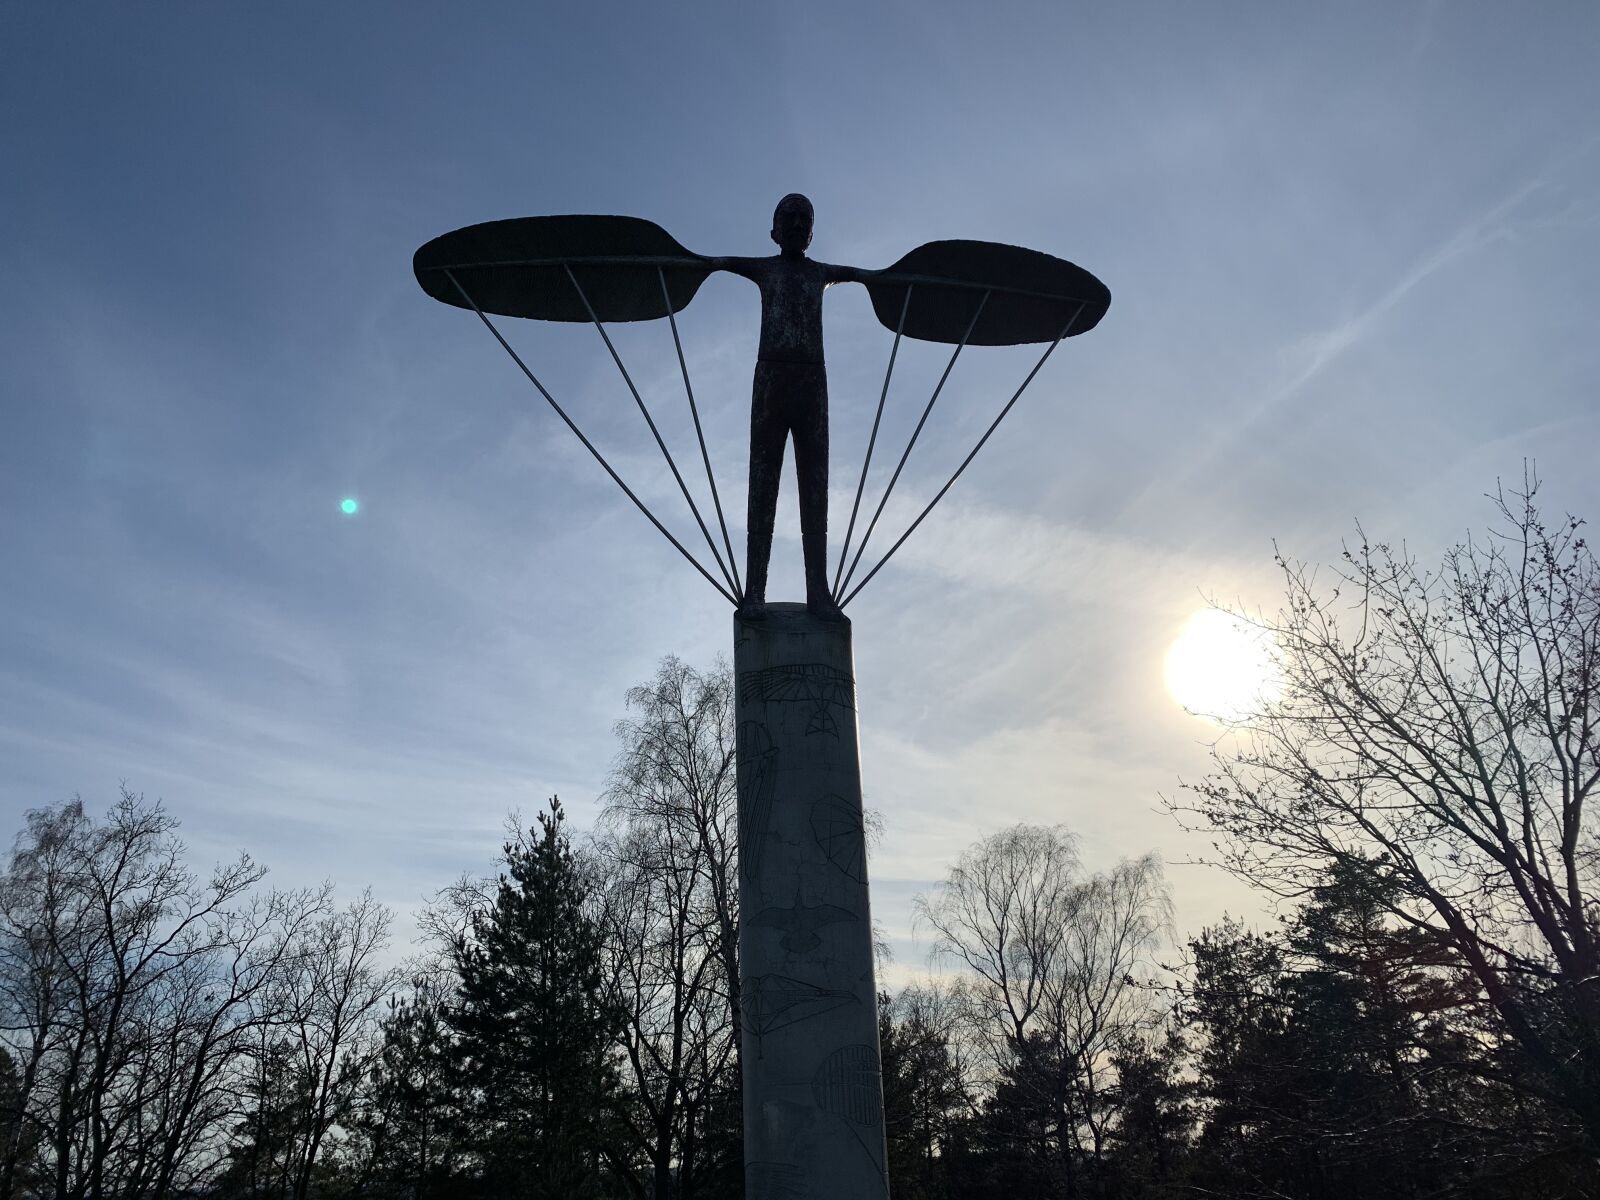 Apple iPhone XR sample photo. Otto lilienthal, flyer, monument photography